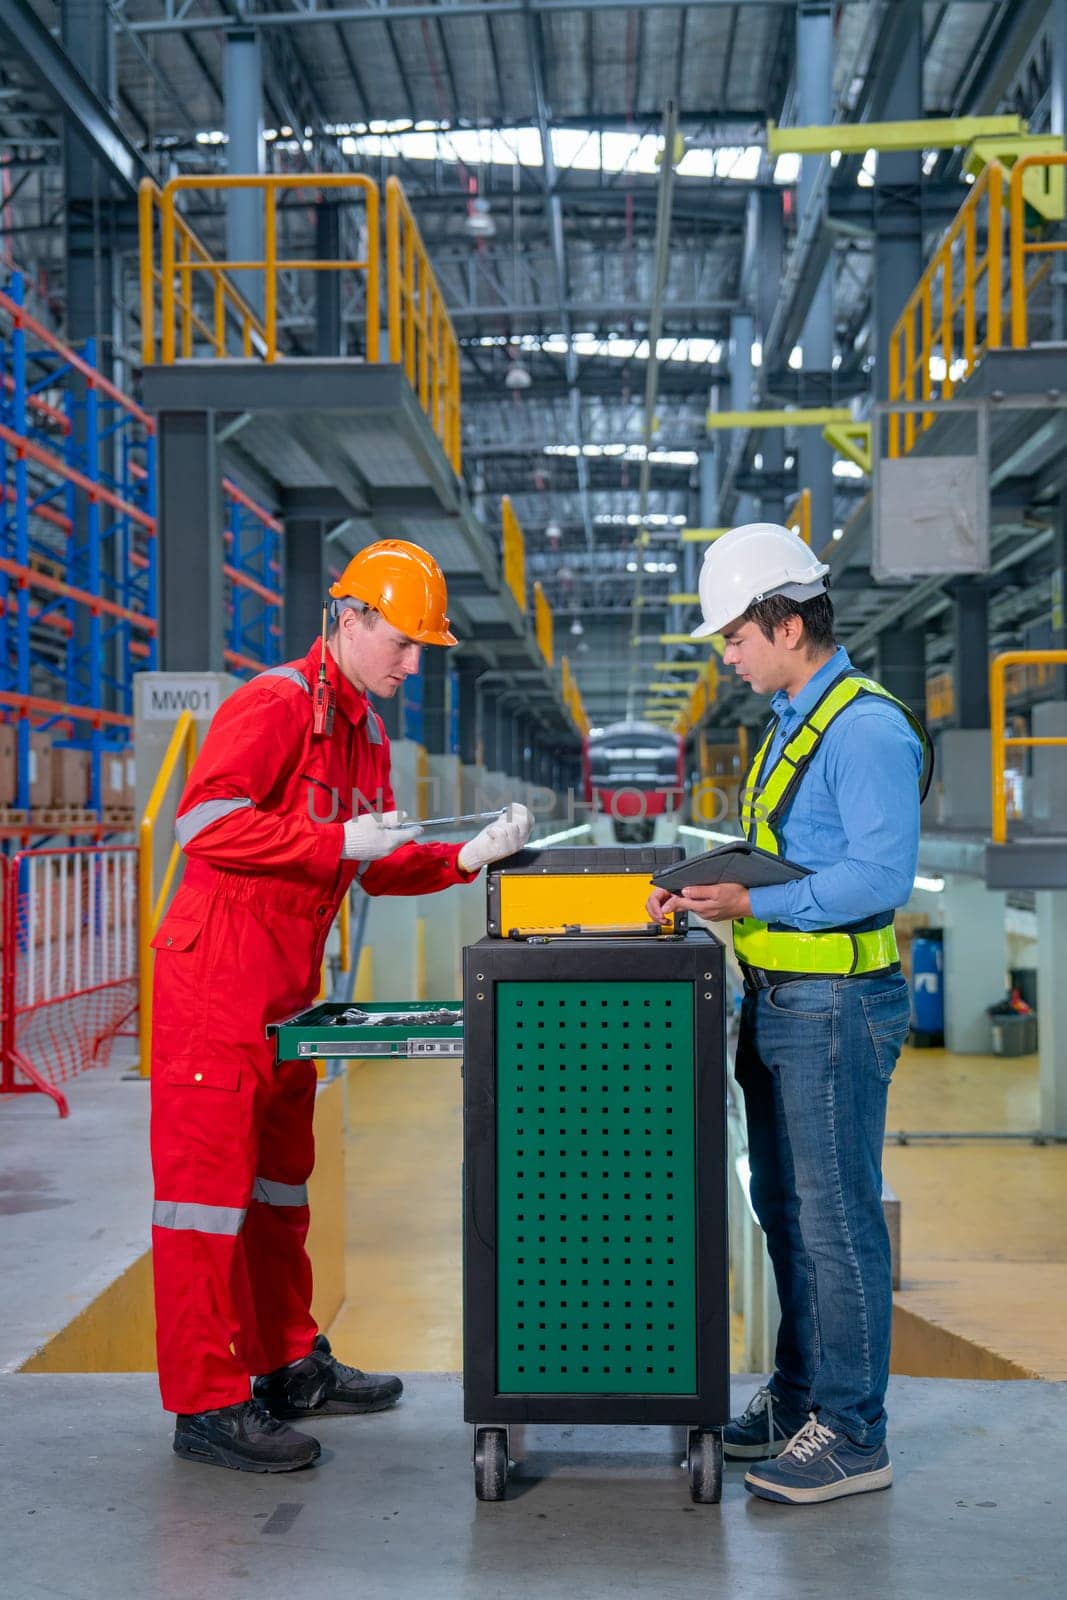 Vertical image of technician and engineer workers discuss about tools and equipment with cabinet in front of railroad tracks of electrical or sky train in factory workplace.